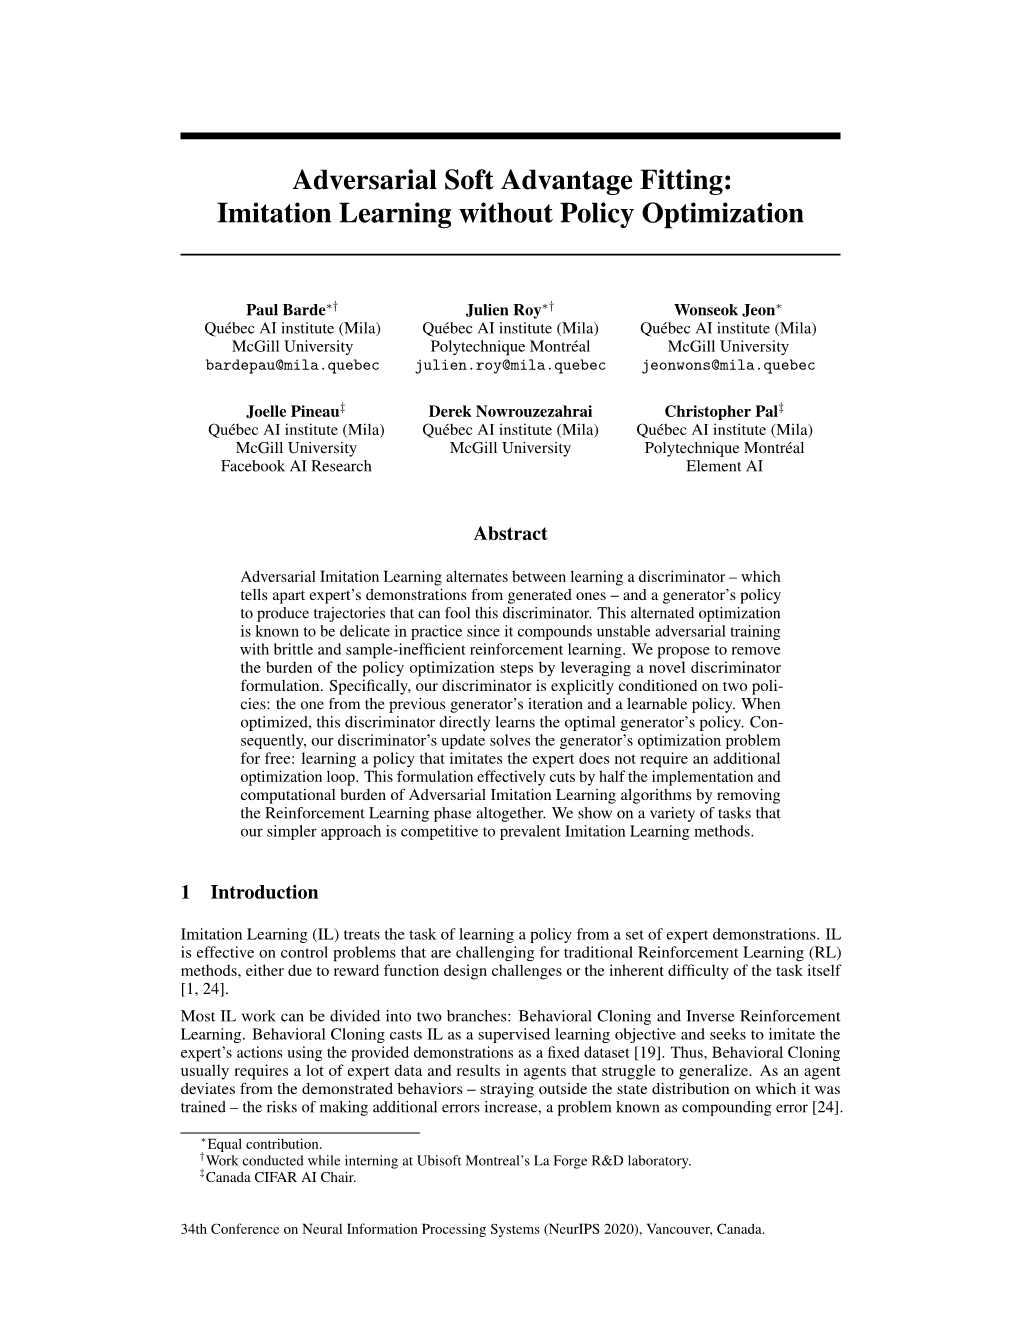 Adversarial Soft Advantage Fitting: Imitation Learning Without Policy Optimization